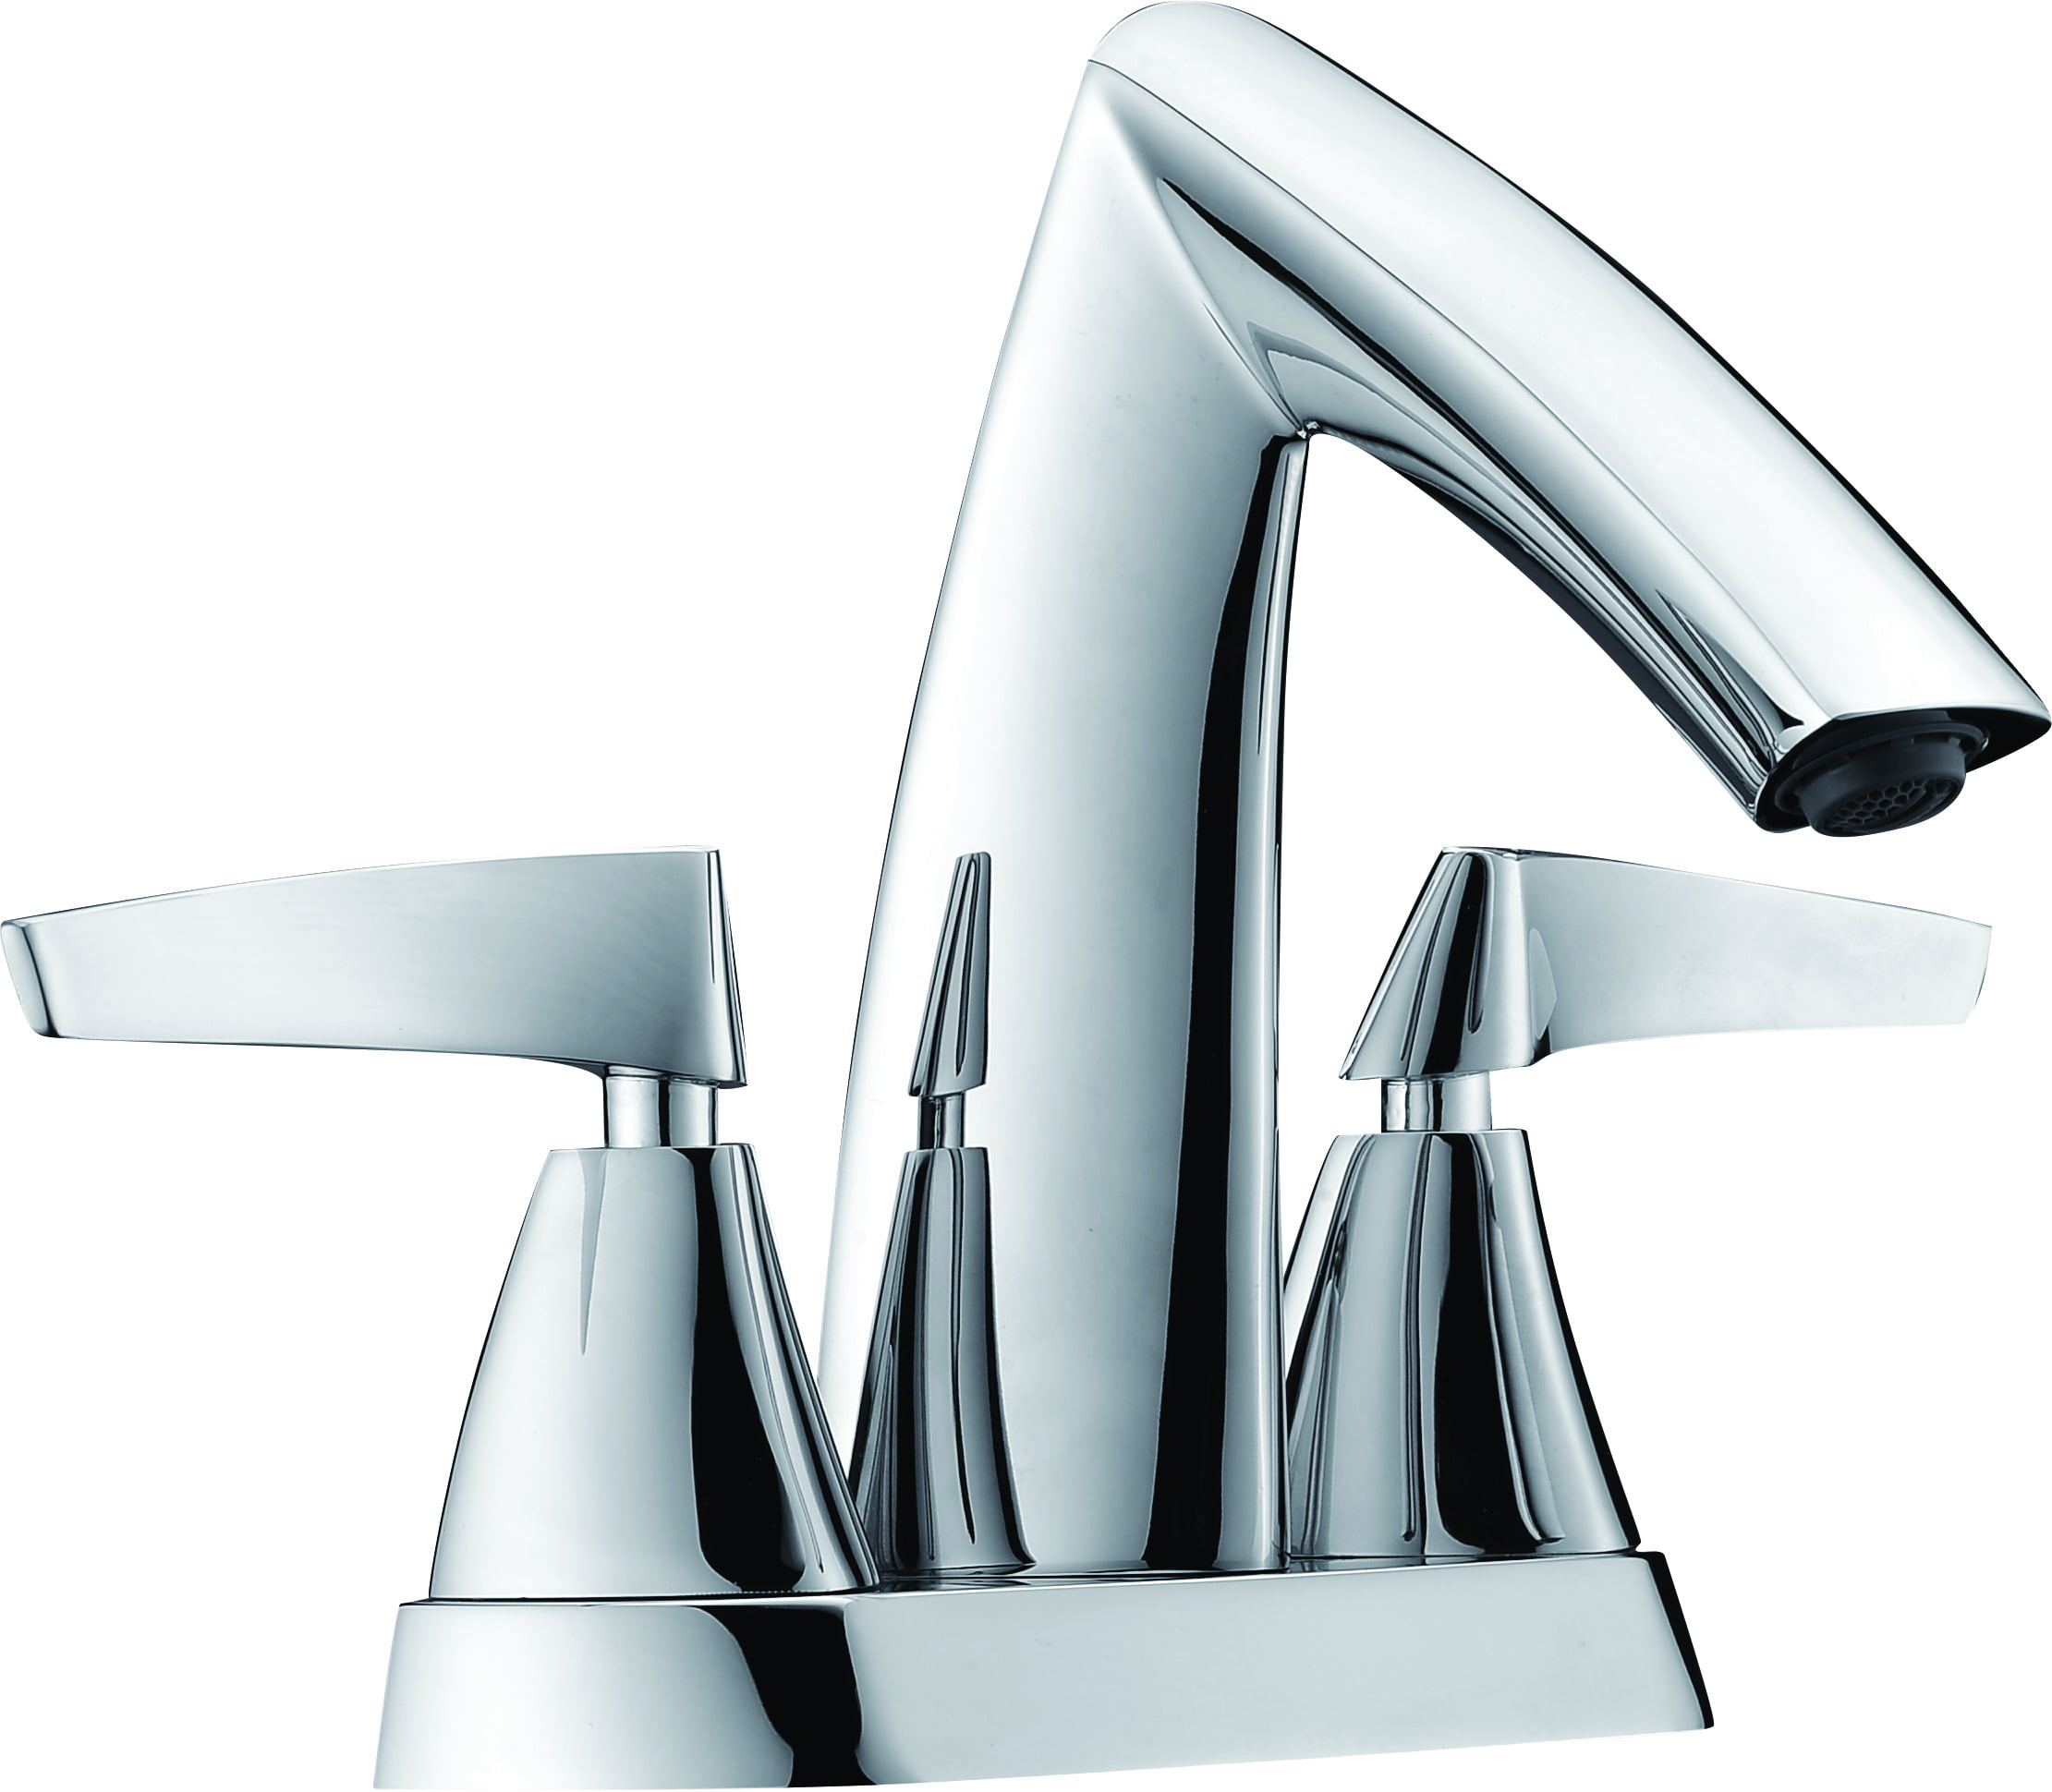 Ab1003-pc 4 In. Two-handle Centerset Bathroom Faucet - Polished Chrome